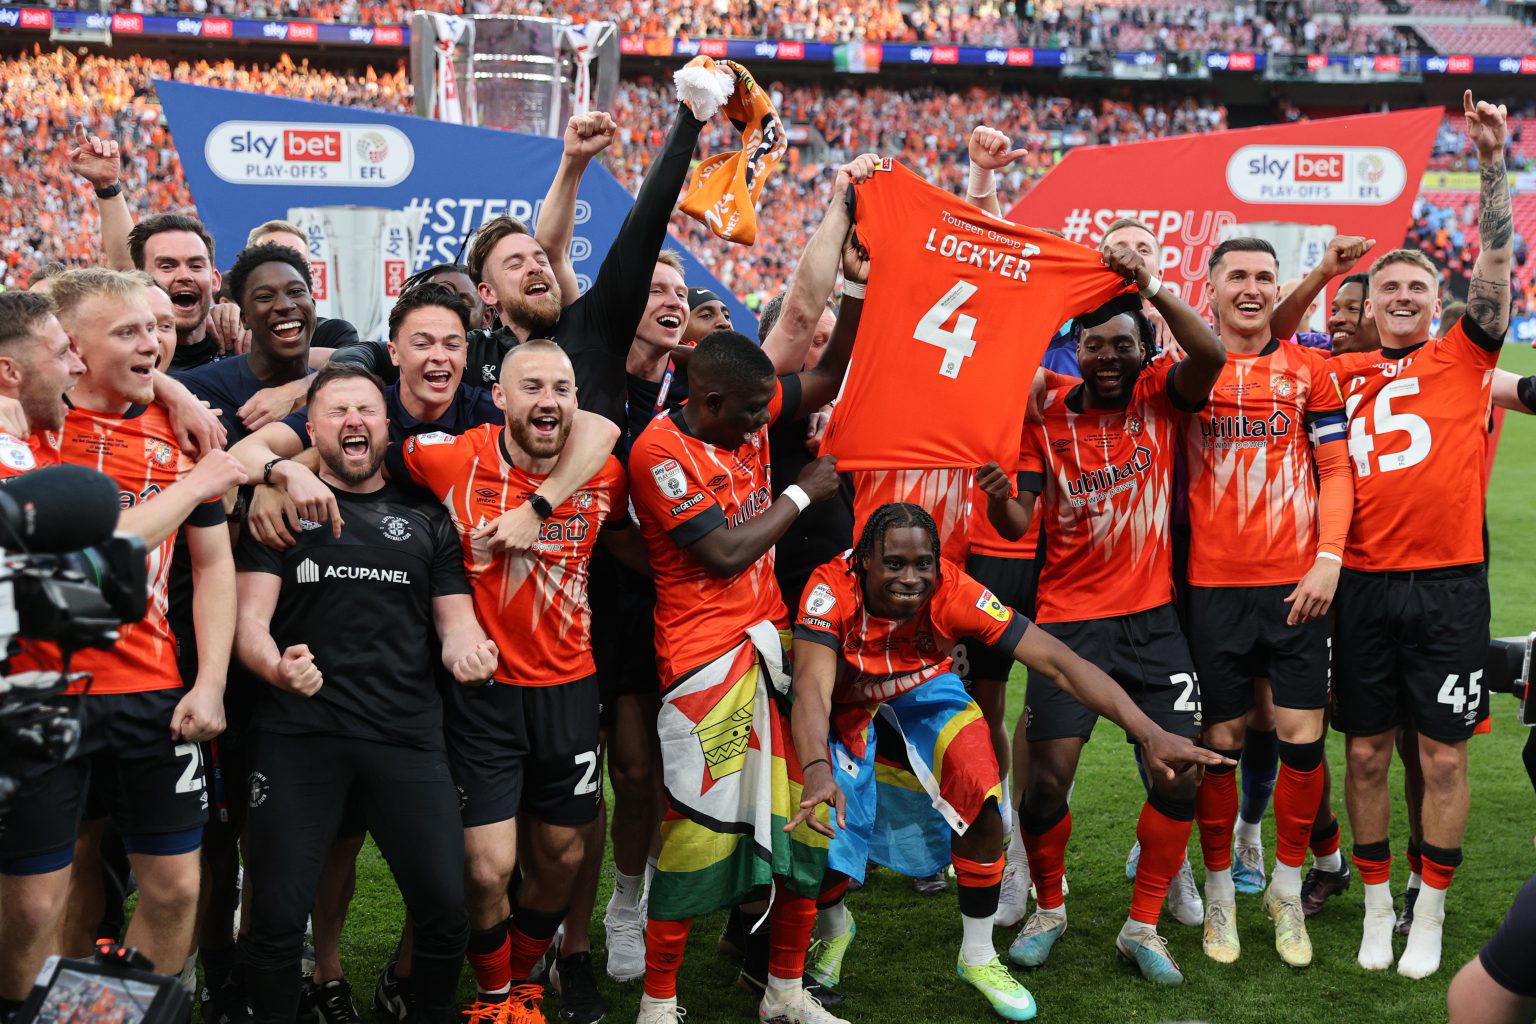  Luton Town players celebrating their victory in the 2022 EFL League Two play-off final at Wembley Stadium after beating Grimsby Town 2-0.